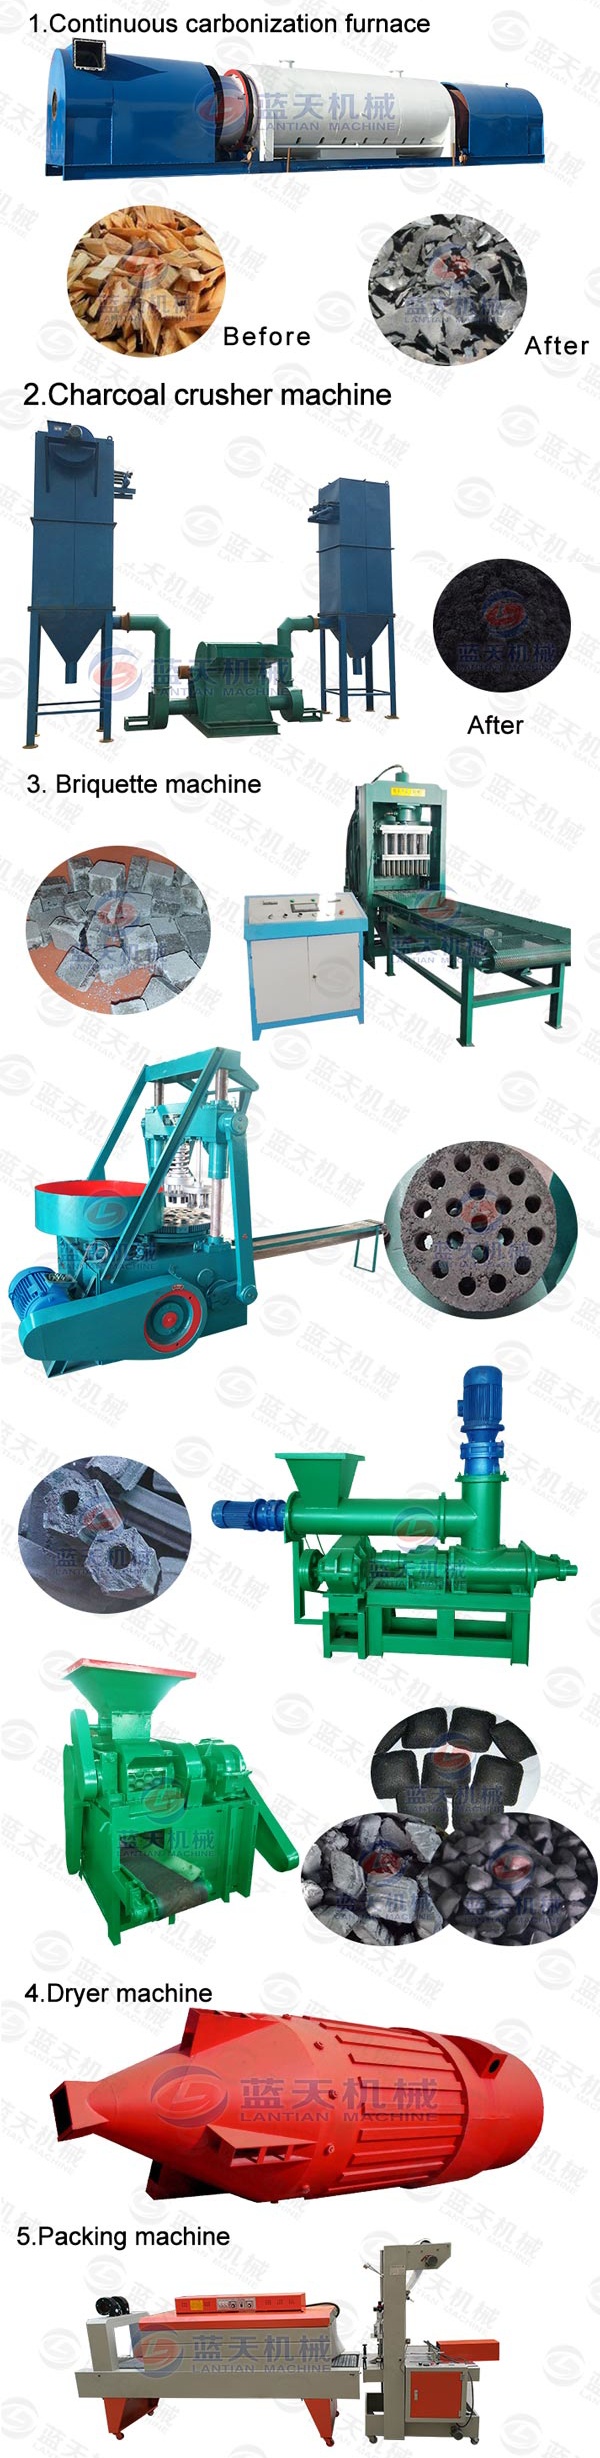 Product line of vertical dryer